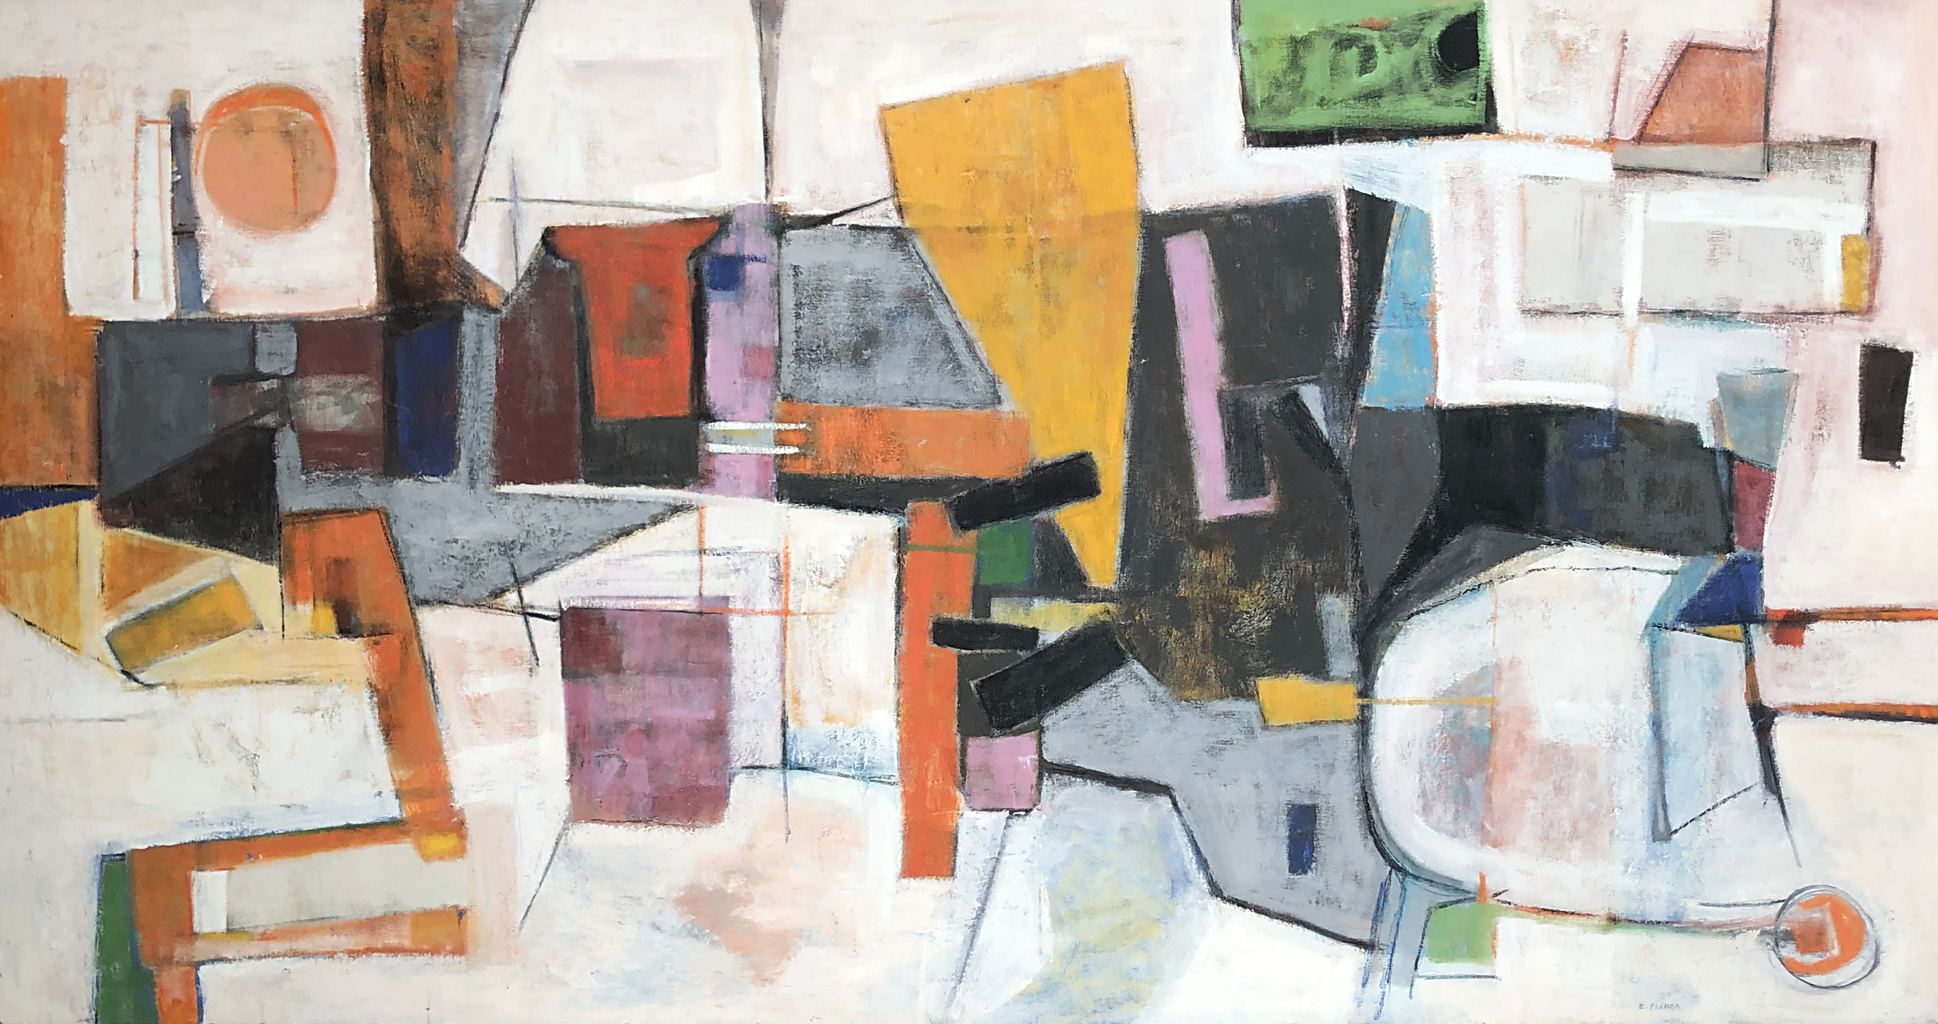 The City: Abstract Painting by Ethel Fisher, 1957, oil on canvas, 30 x 68 inches, mid-twentieth century abstract painting, widely exhibited in Havana, Cuba.